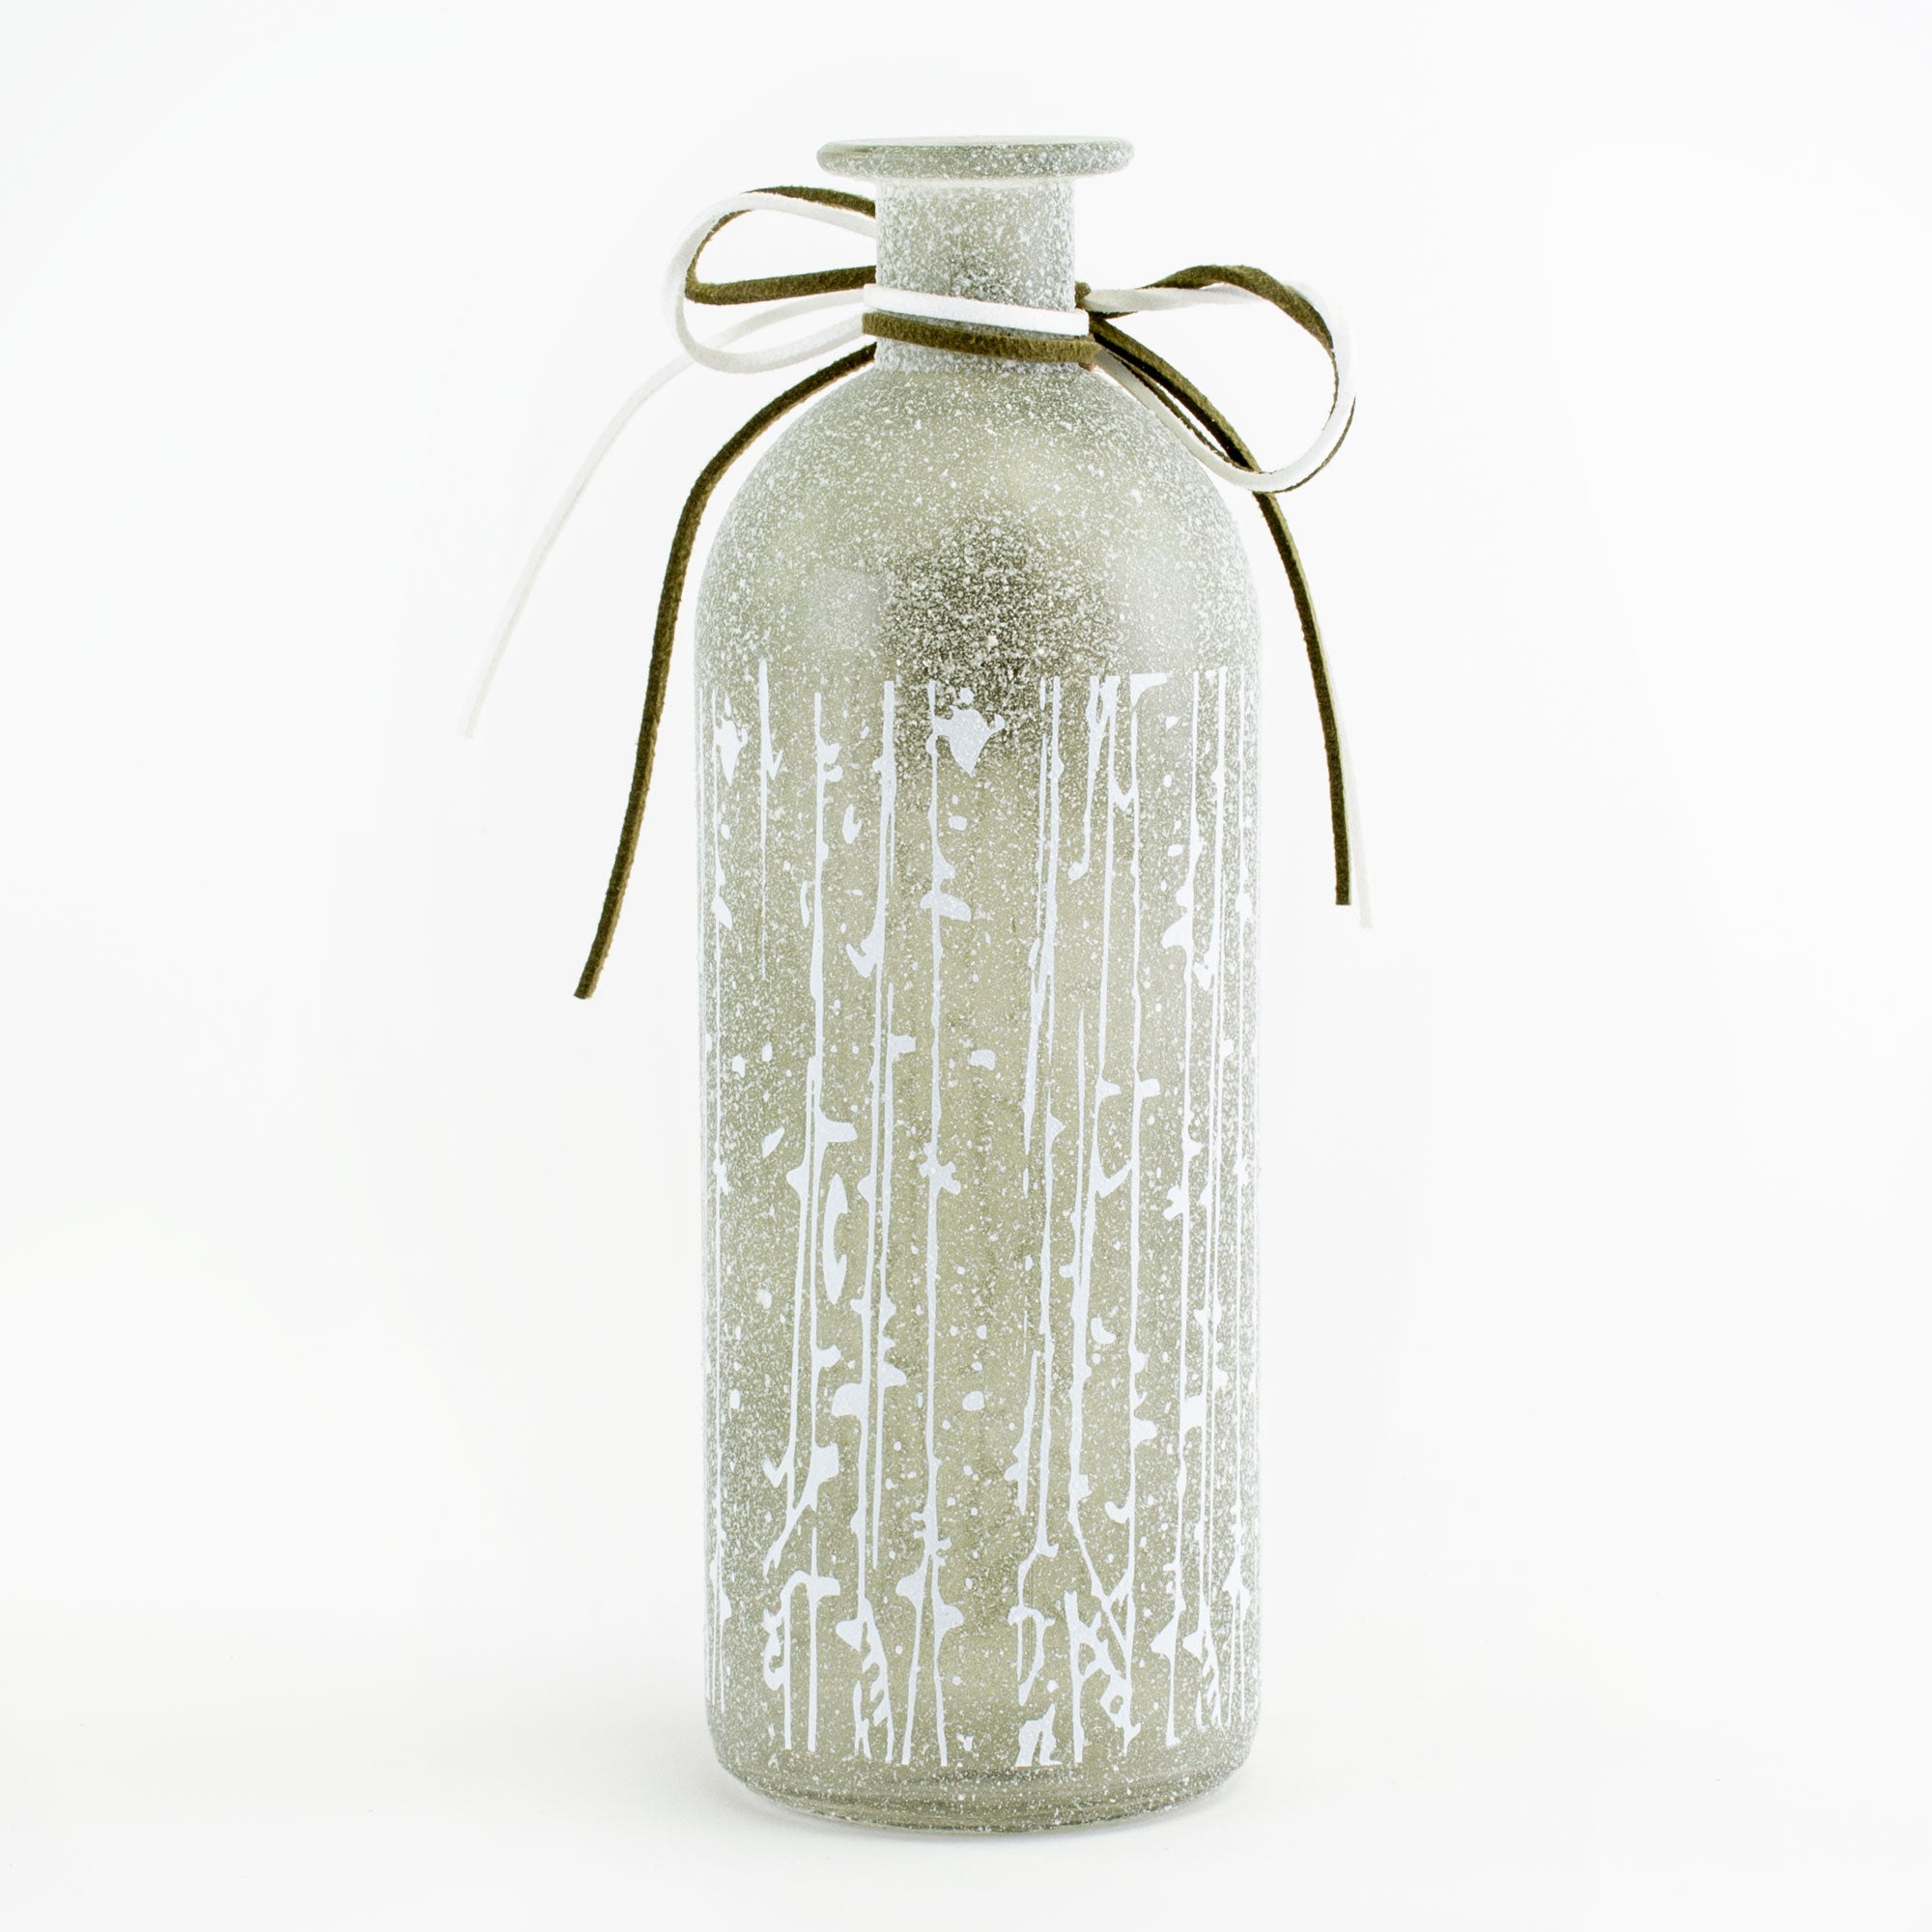 This image shows a pale green, frosted glass vase, with a small wooden star tied around its neck, against a white background